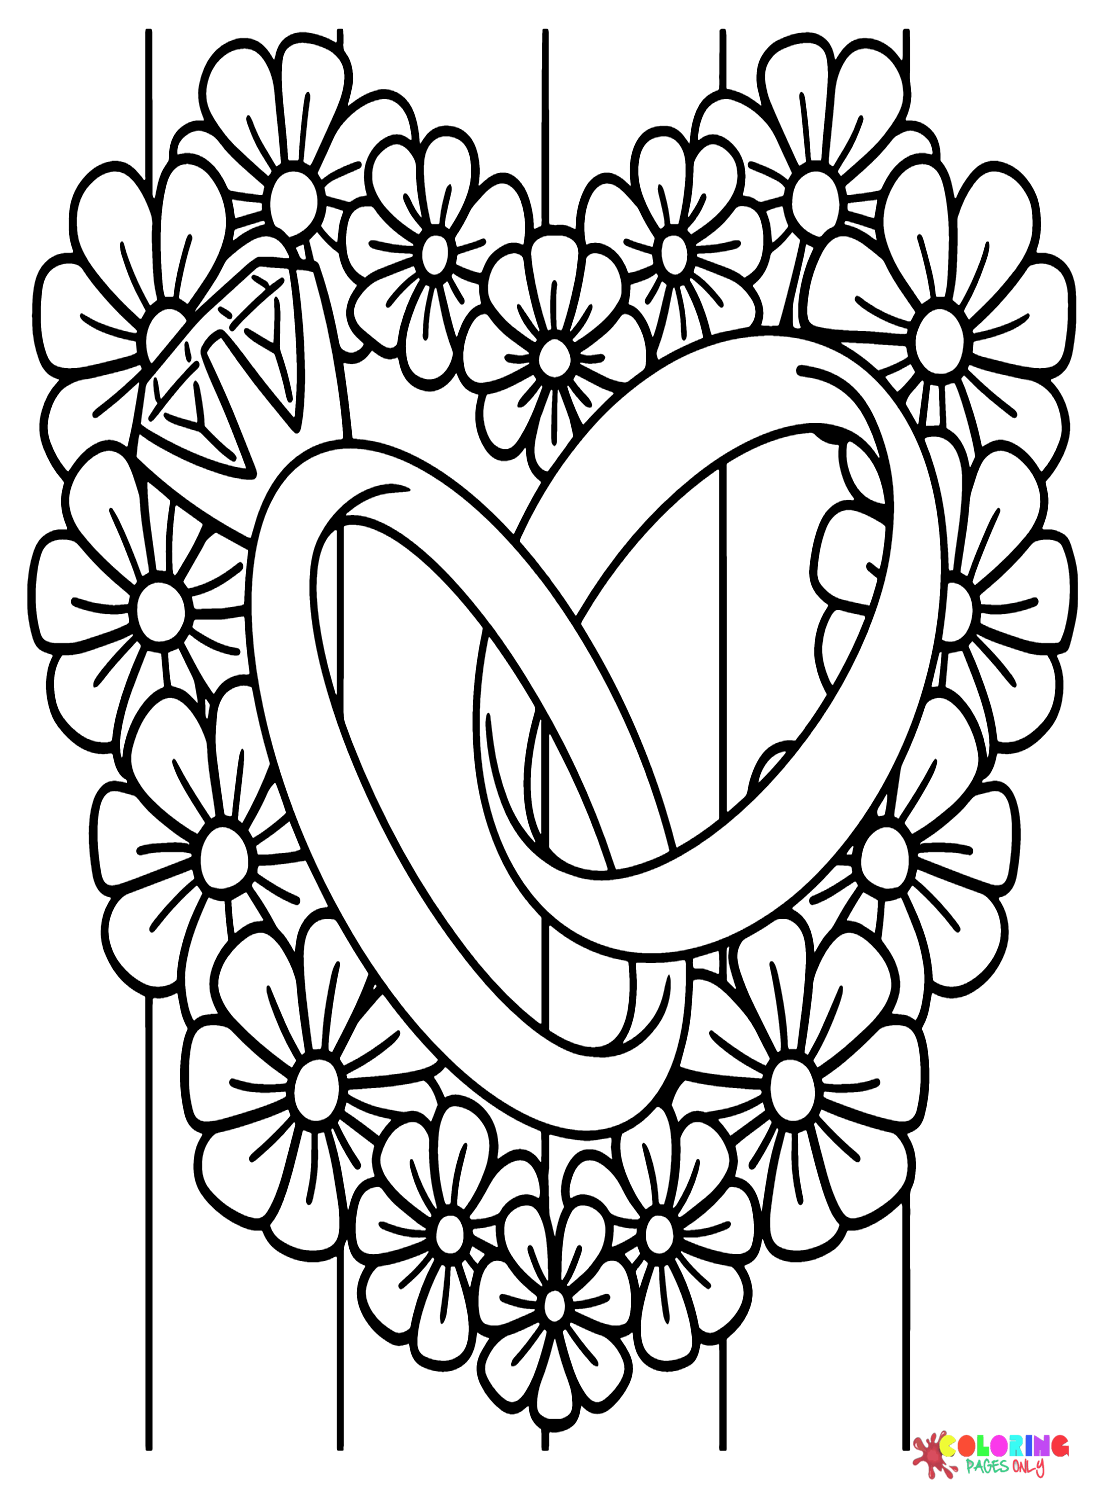 Wedding Rings with Heart Coloring Pages - Wedding Ring Coloring Pages ...